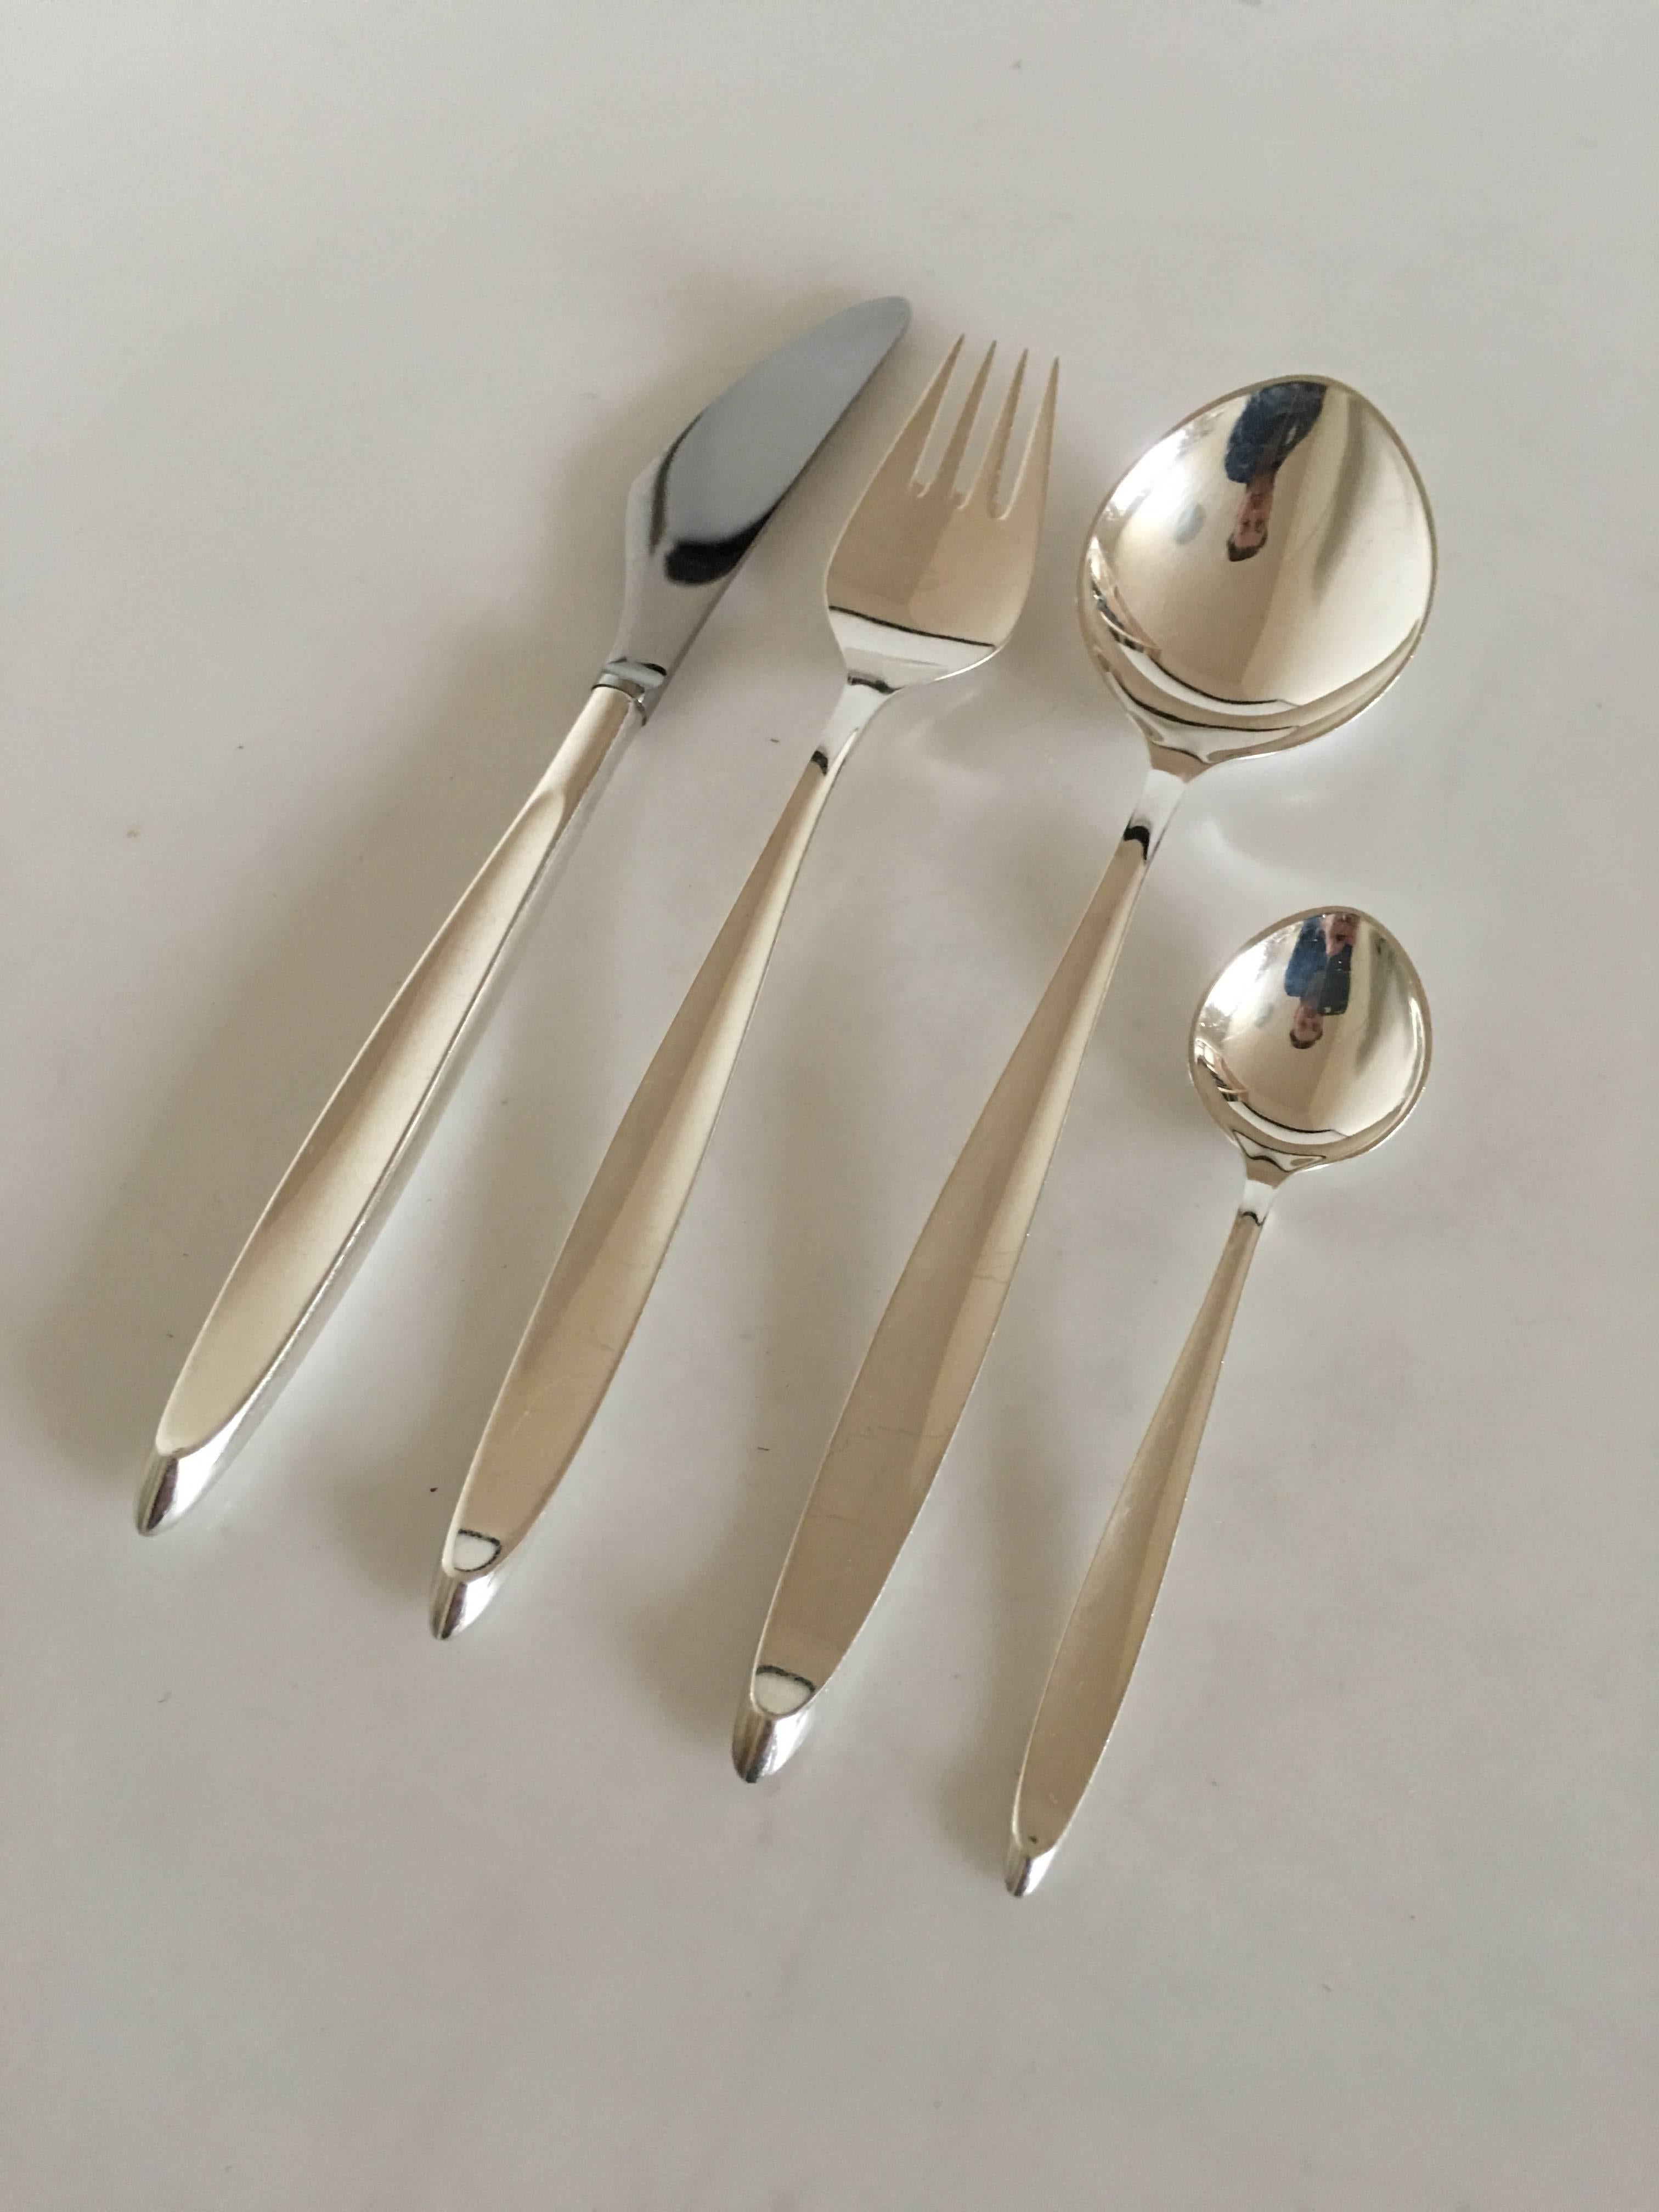 COHR sterling silver mimosa flatware set for six people, 24 pieces. The set consists of the following pieces: 

Six x Dinner Knives 21.5 cm L 
Six x Dinner Forks 19.5 cm L. 
Six x Dinner Spoons 19.5 cm L.
Six x Tea Spoons 12 cm L. 

All the